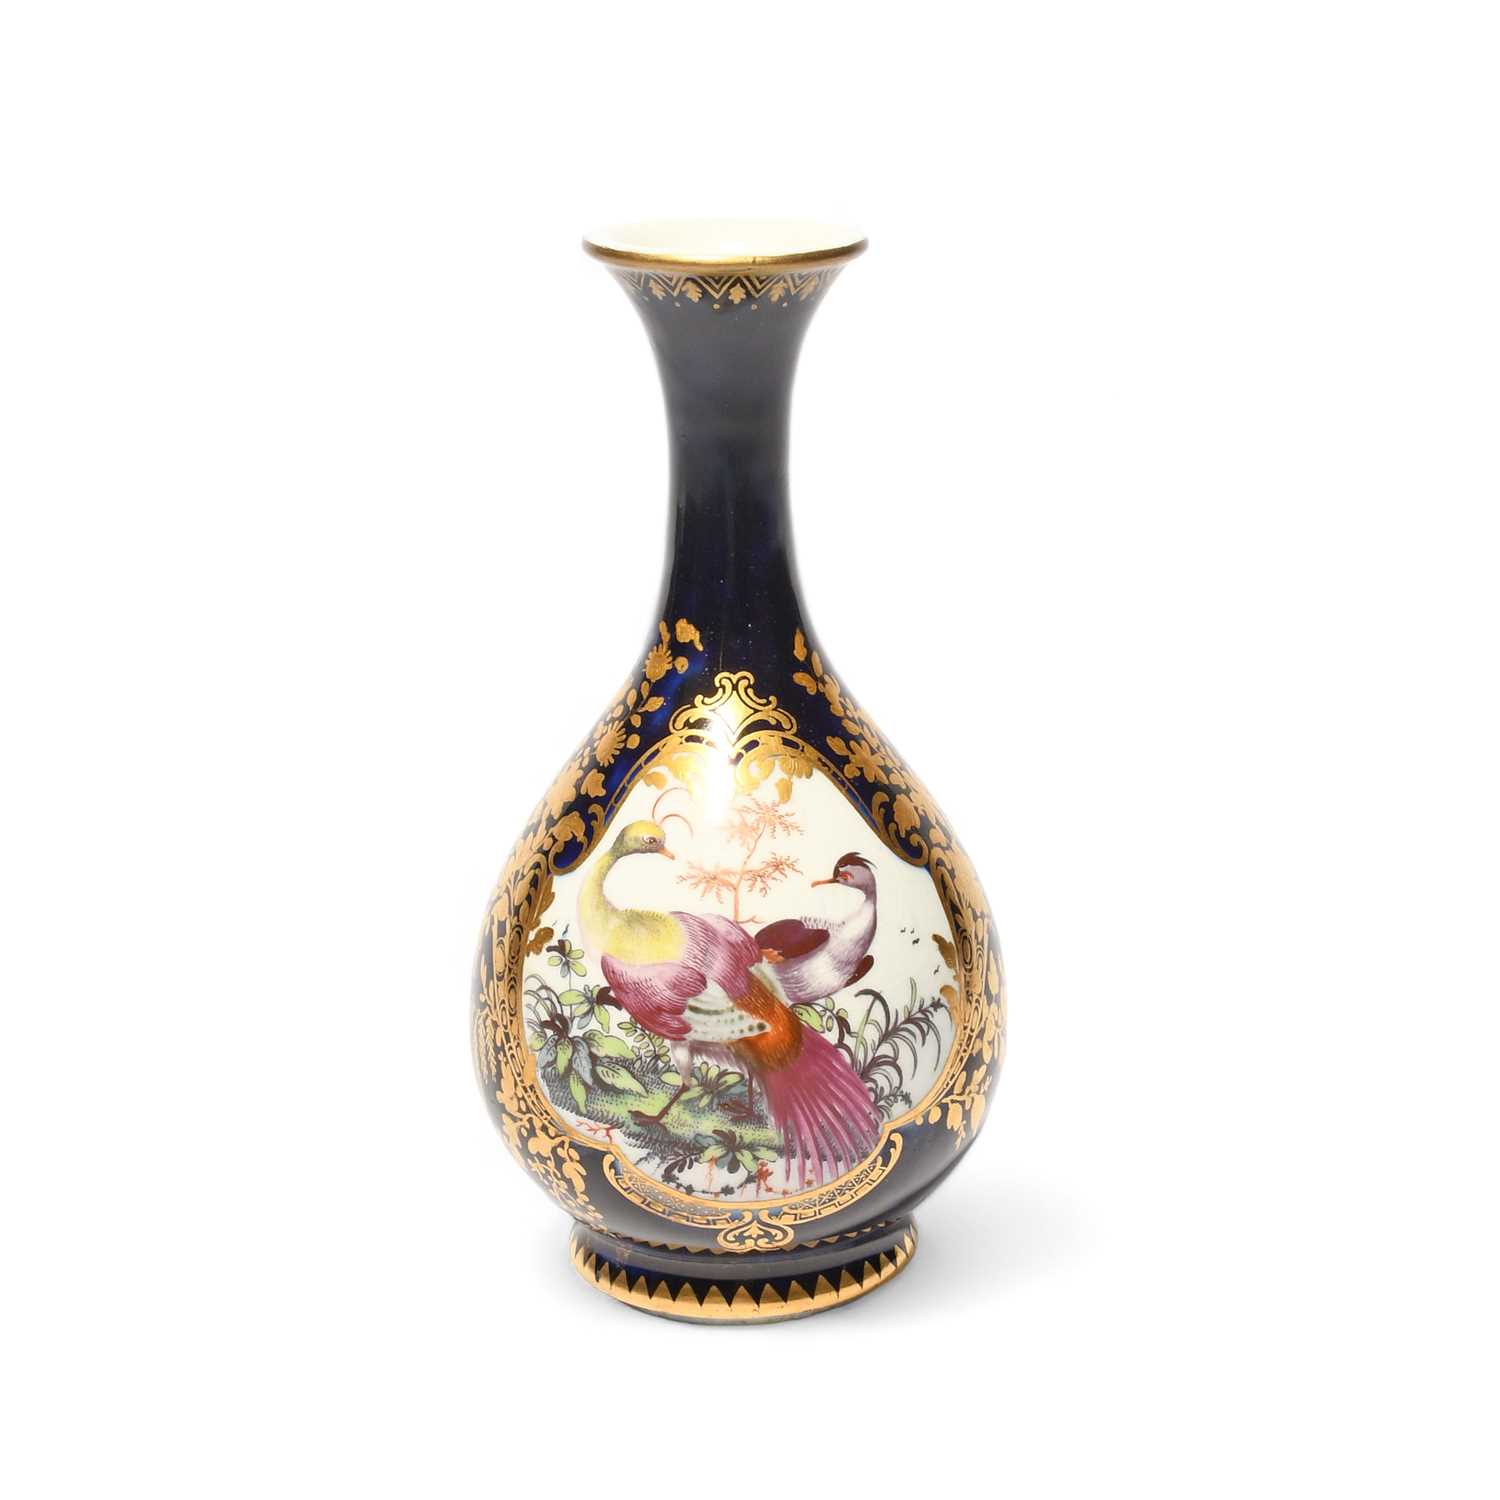 A small Chelsea bottle vase, c.1765, painted with two exotic long-tailed birds before leafy